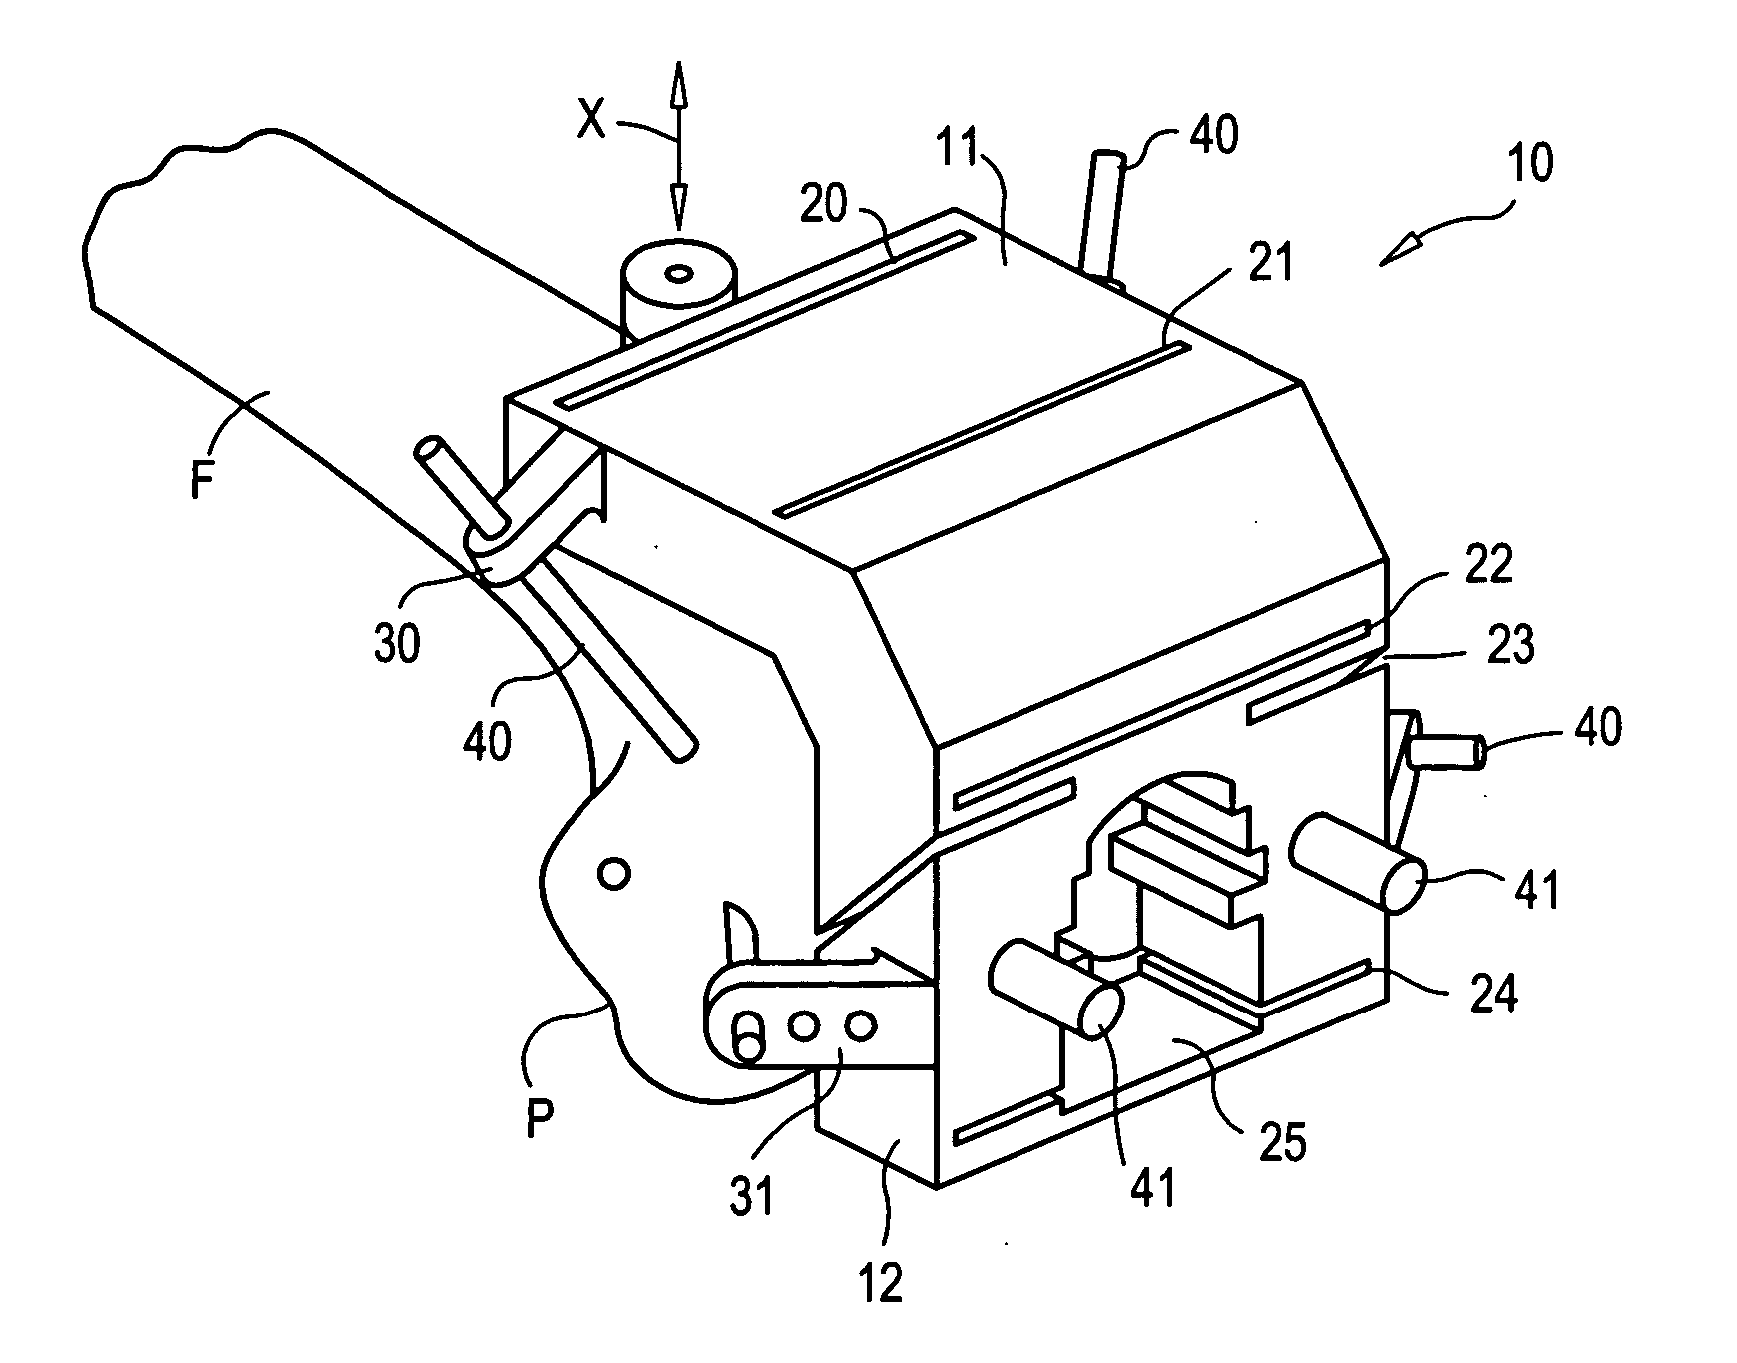 Cutting guide apparatus and surgical method for use in knee arthroplasty